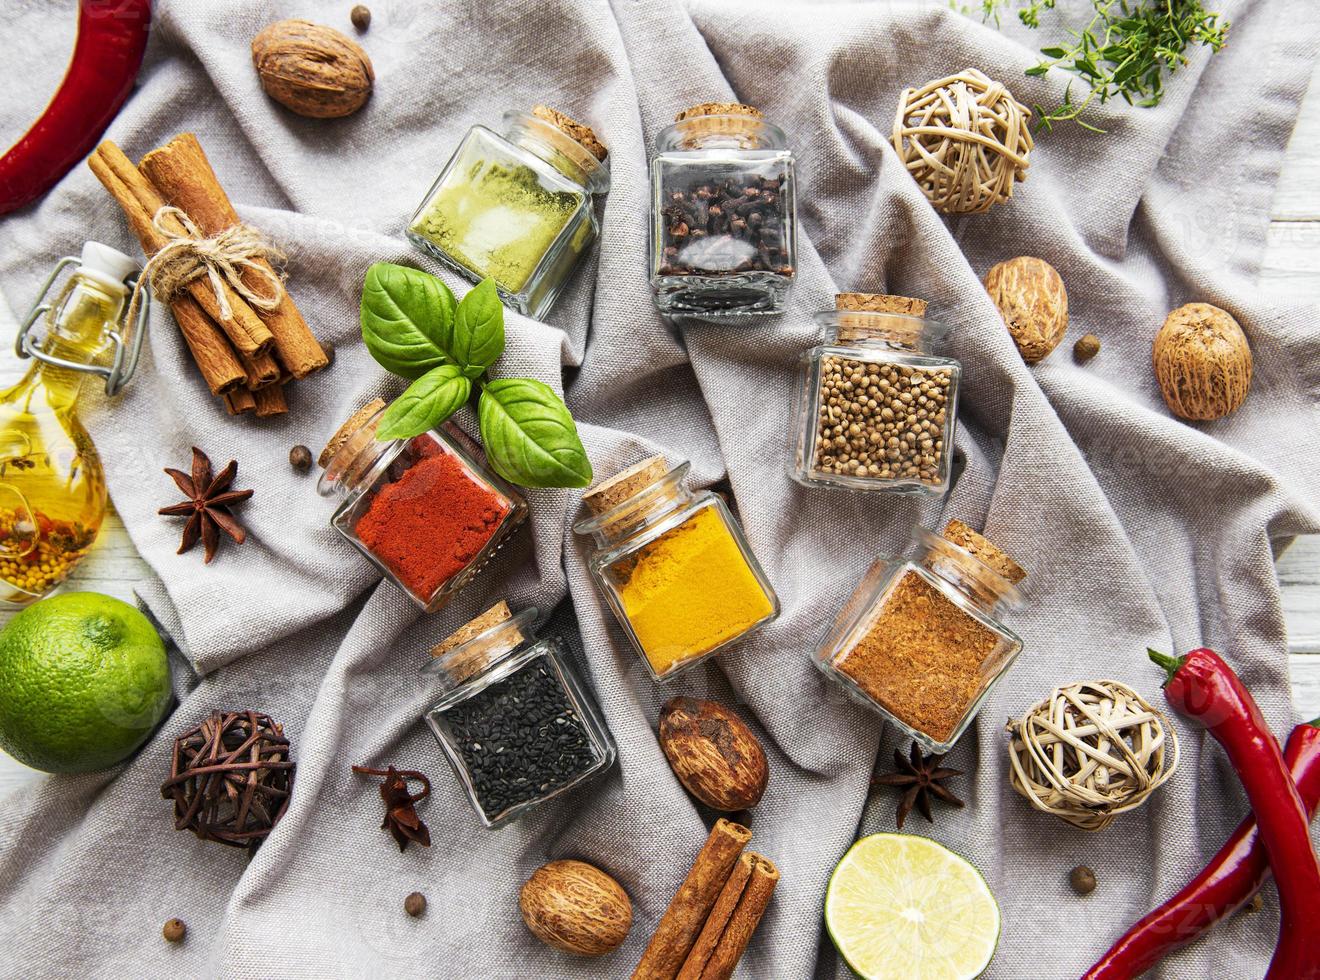 Jars with dried herbs, spices on the table photo